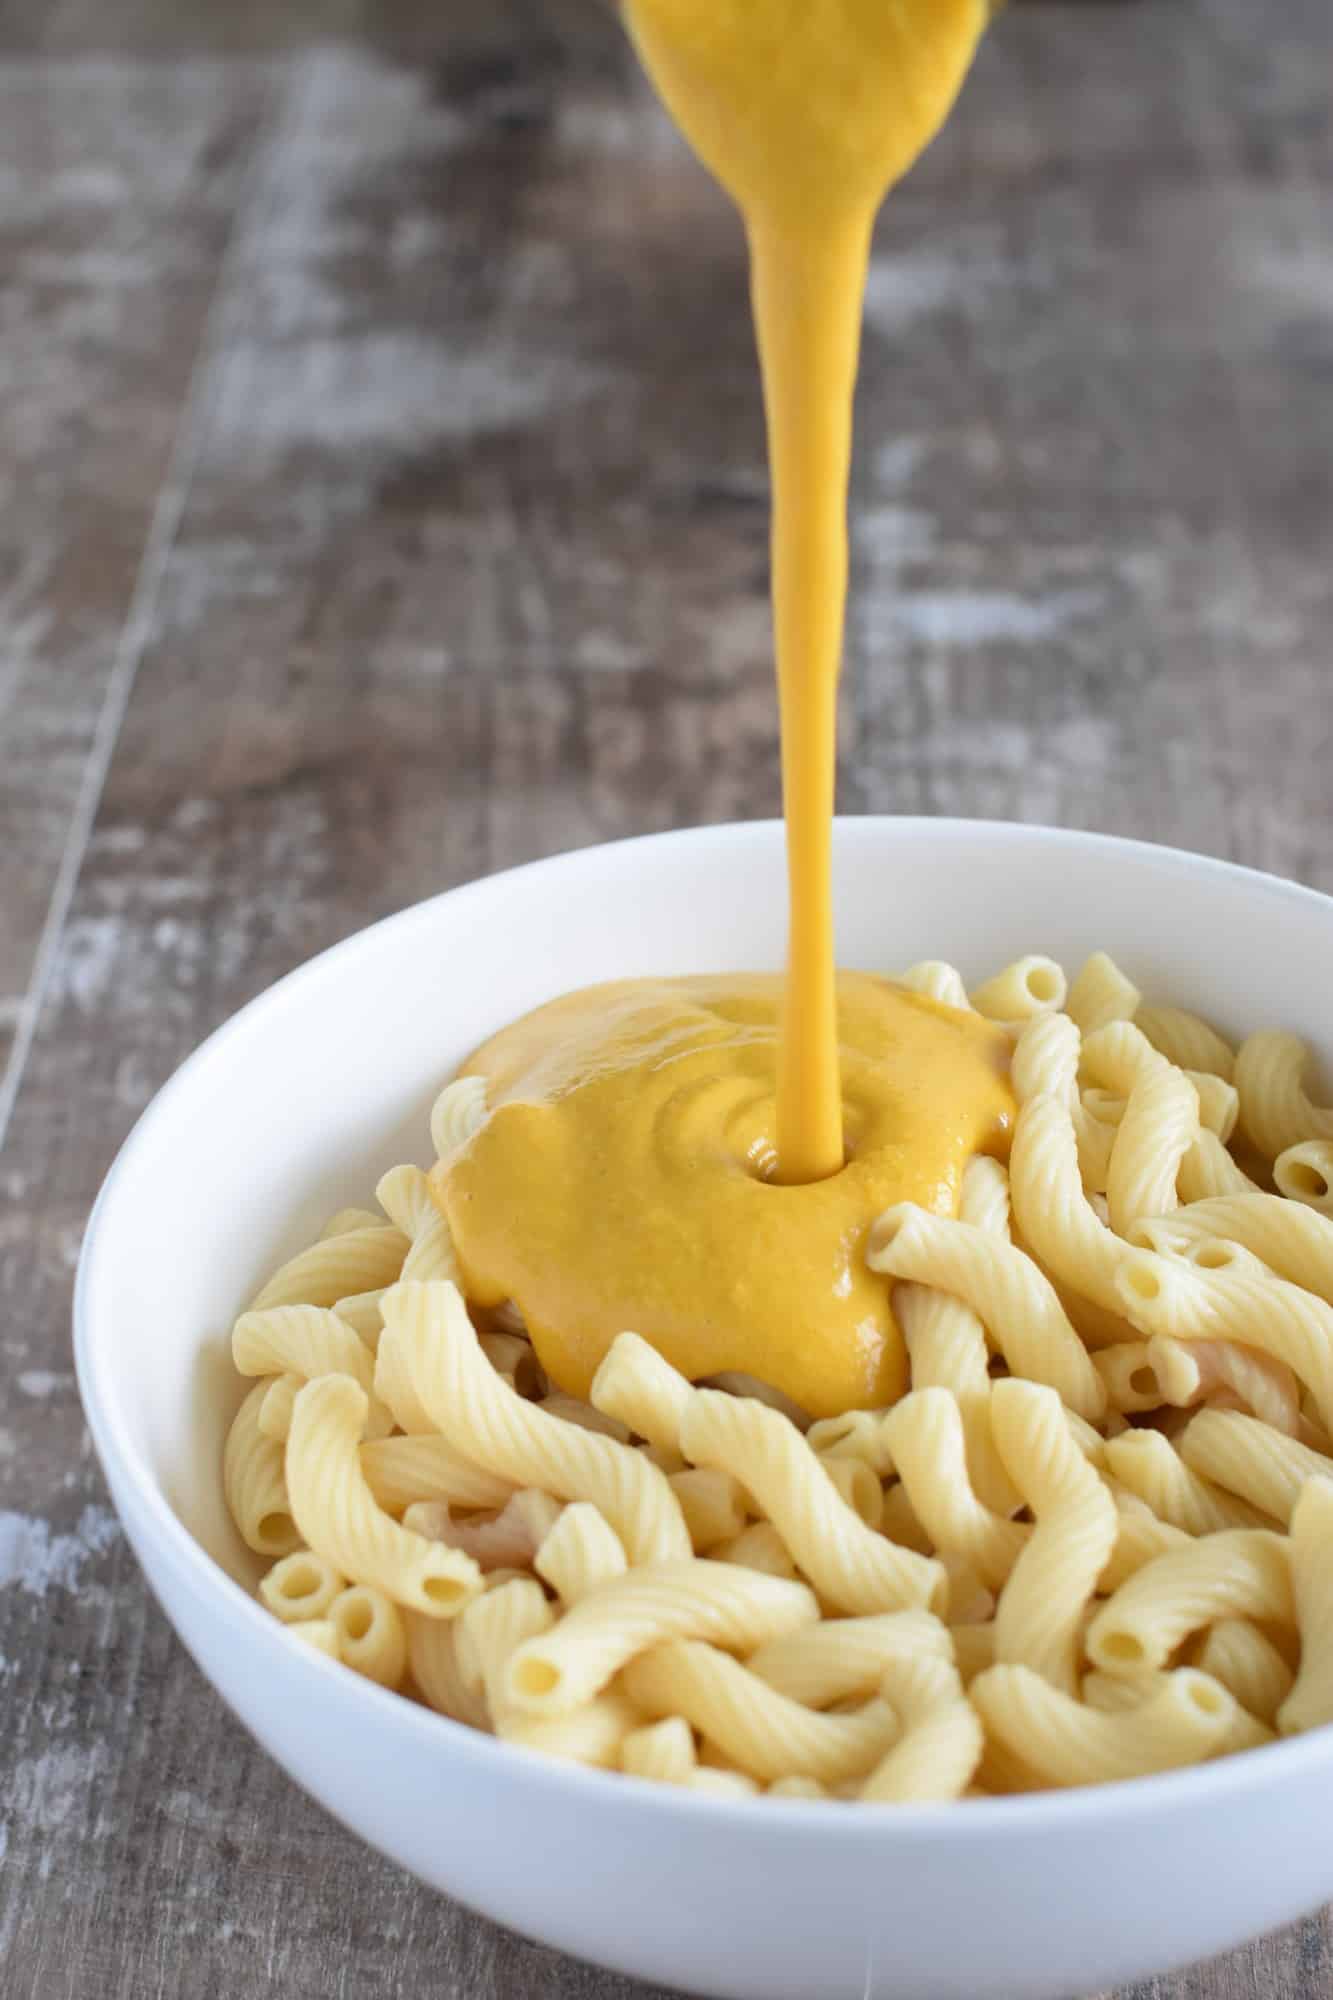 pouring the cheese sauce onto the pasta in the serving bowl